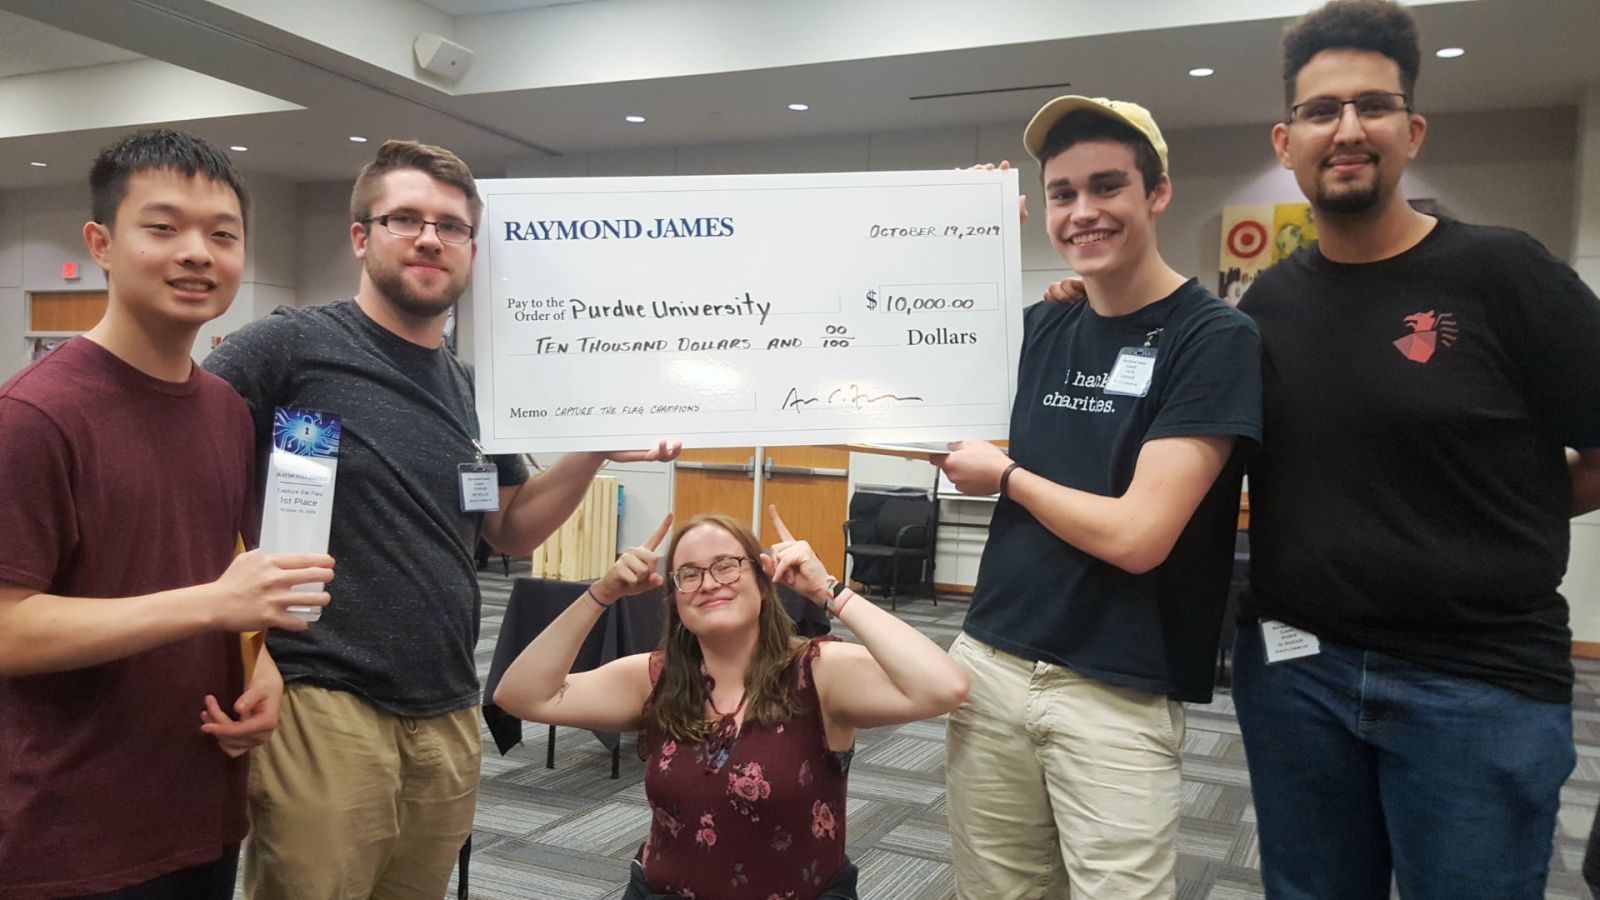 The winning team was made up of (from left) Alex Lin, College of Engineering; Connor McMillin, College of Science; Alissa Gilbert, Polytechnic Institute; Jack Zimmer, Polytechnic Institute; Bader AlBassam, College of Science.